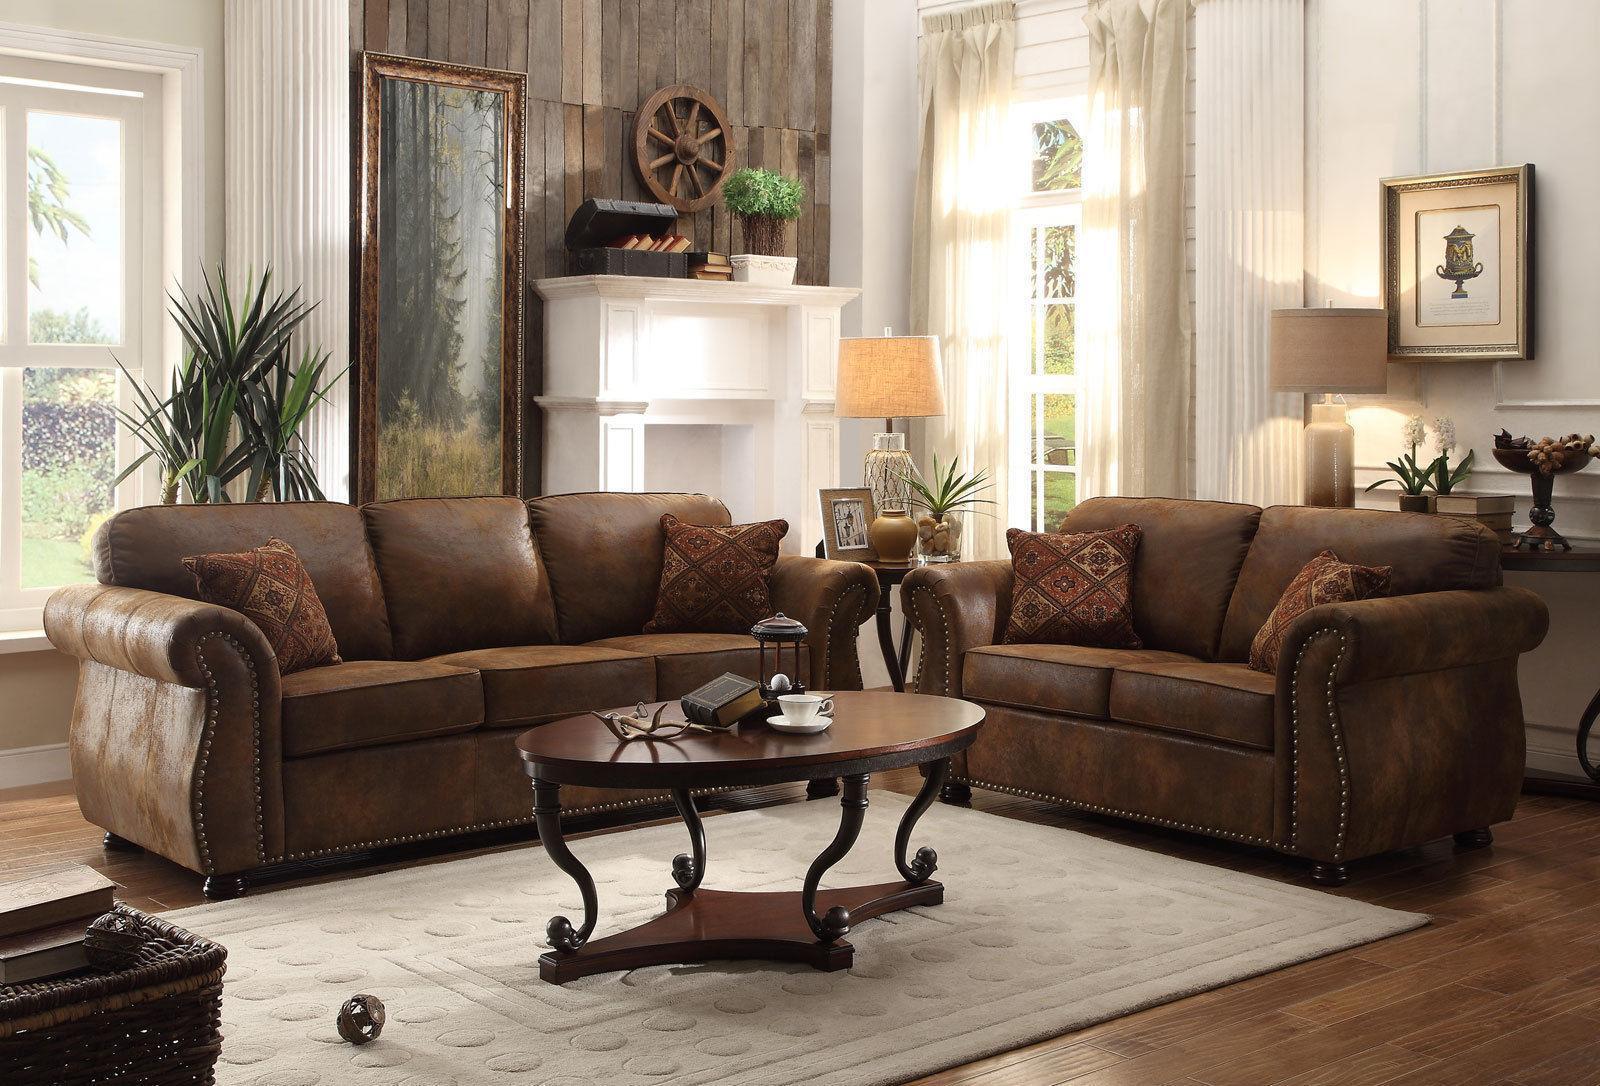 Tufted Brown Faux Leather Living Room Chairs